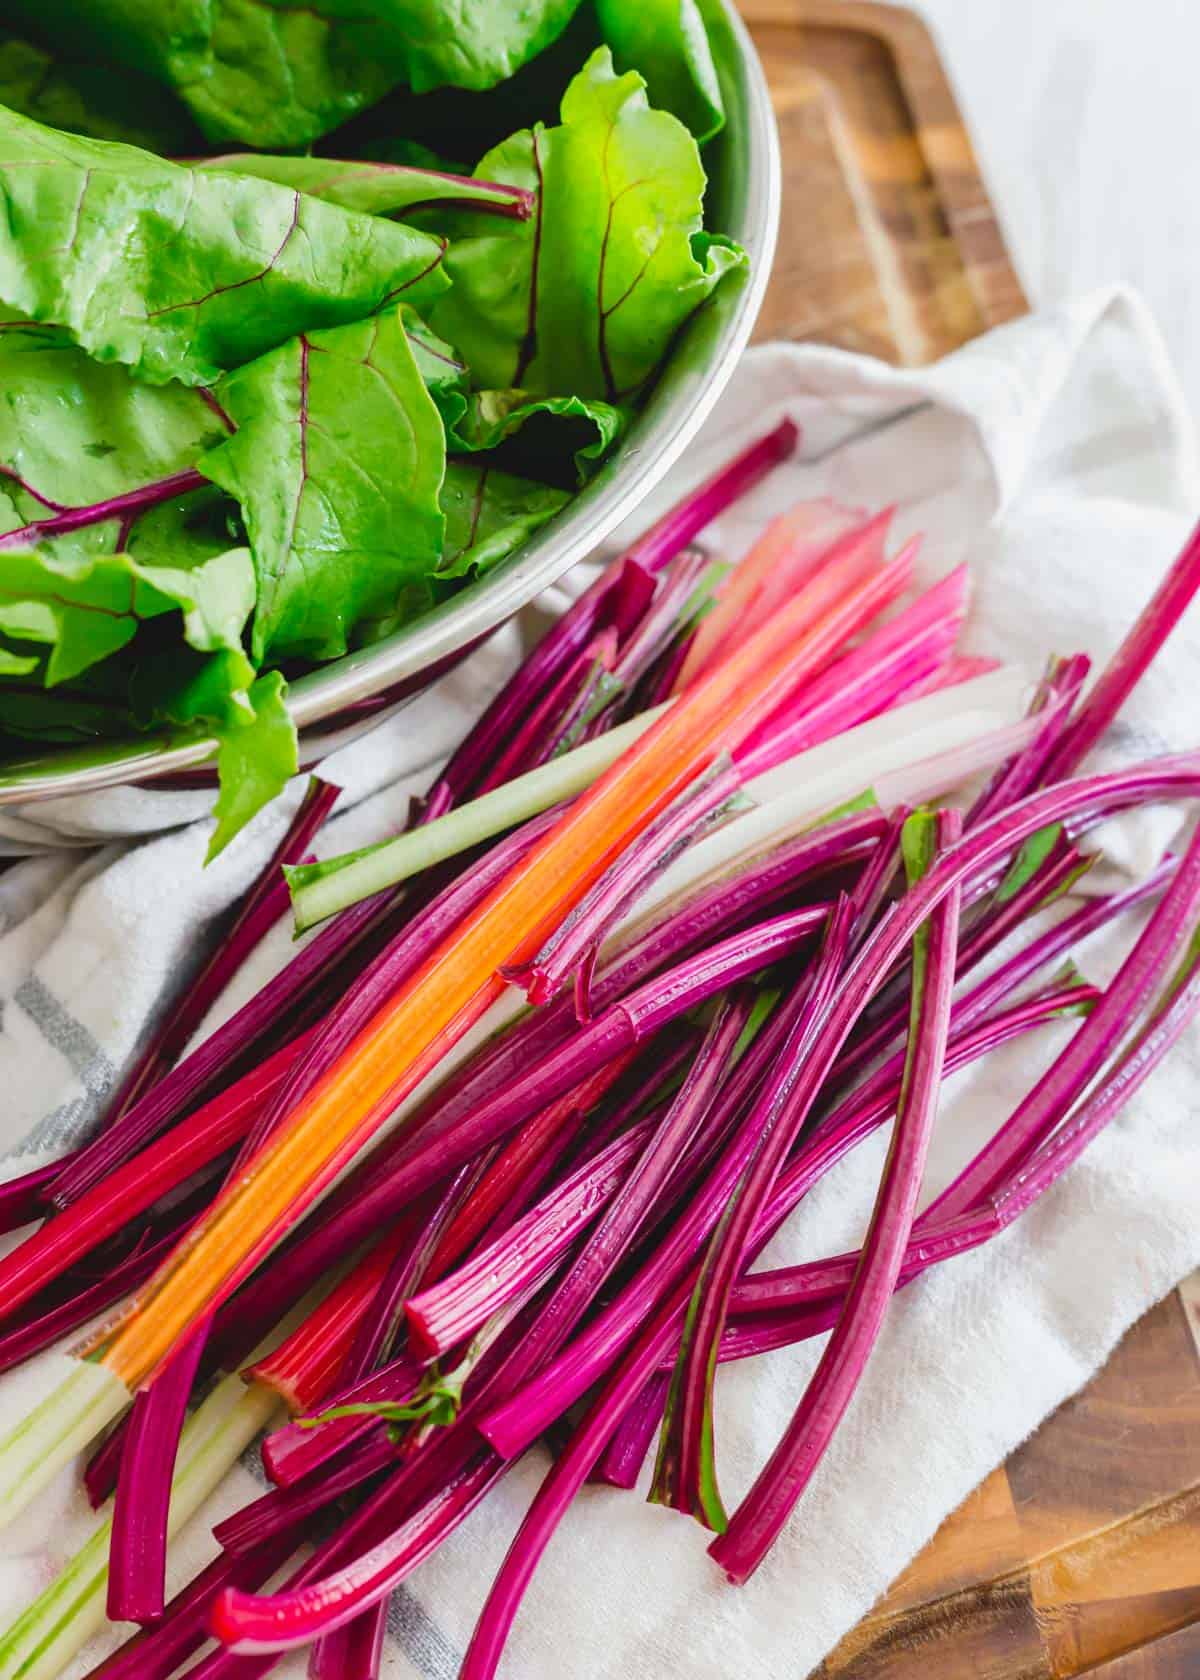 Rainbow Swiss chard stems and beet greens stems with a bowl of greens in the background.